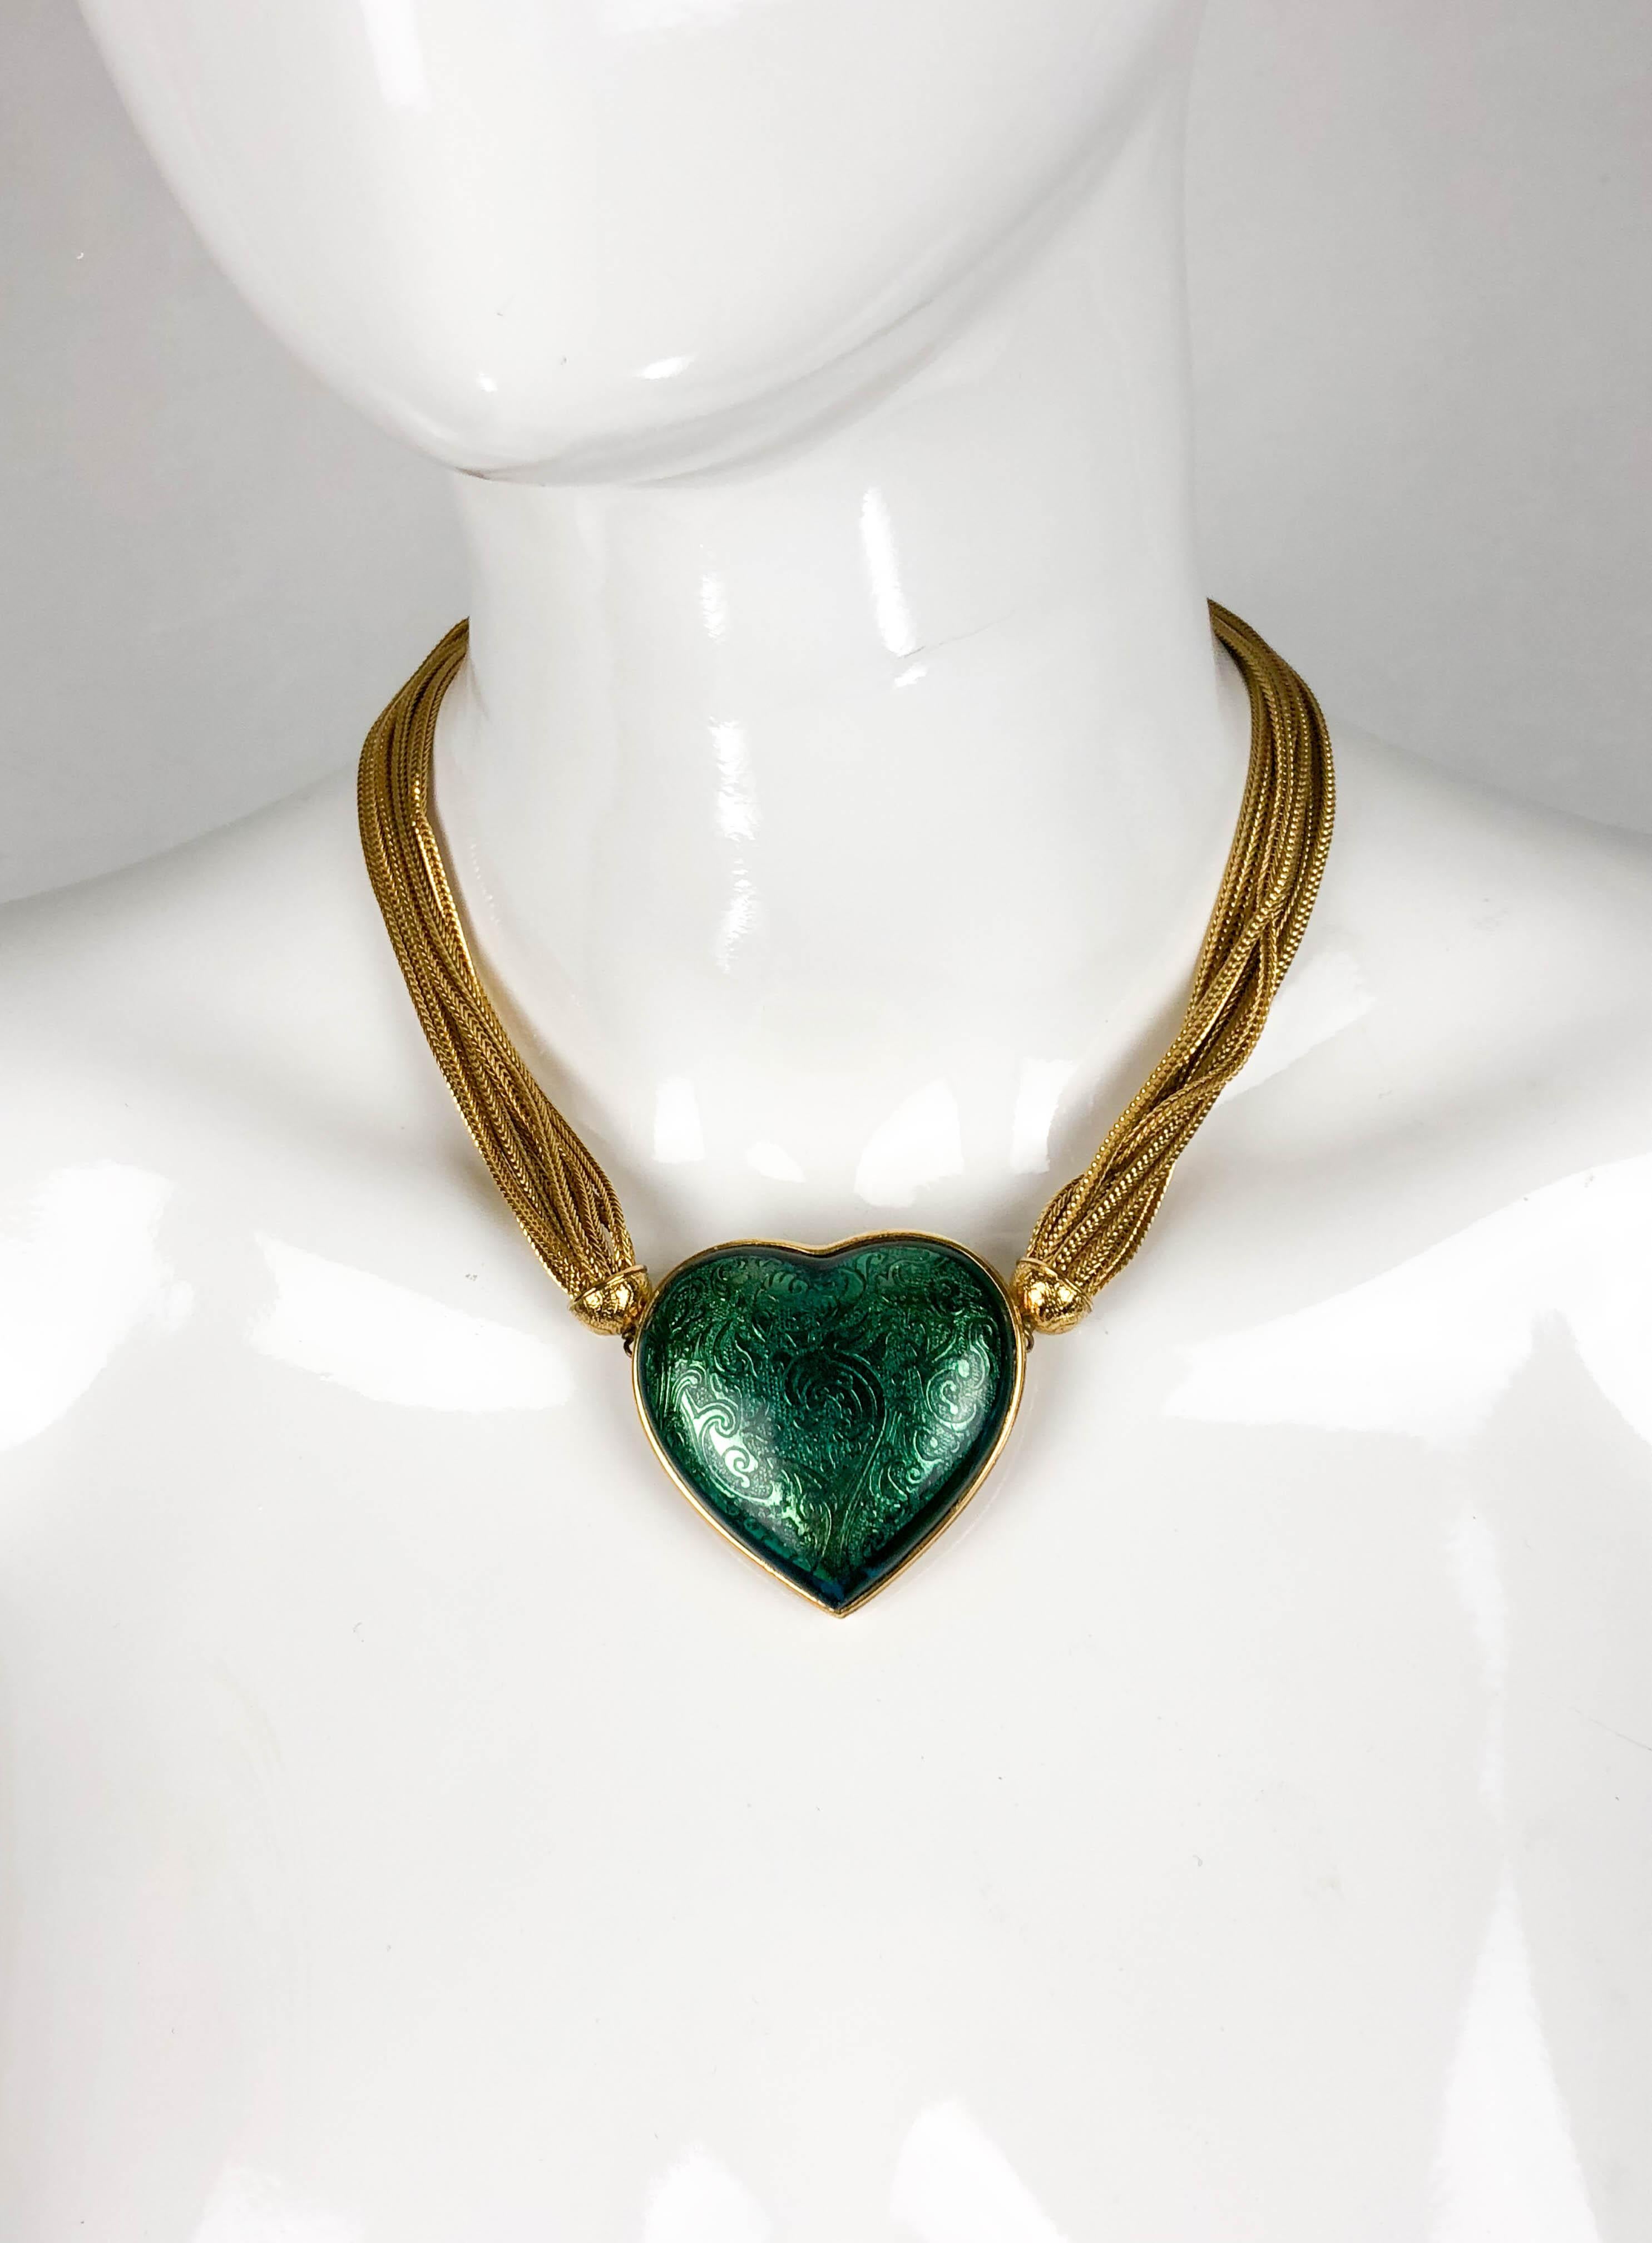 1980's Yves Saint Laurent Green Heart Pendant Necklace In Excellent Condition For Sale In London, Chelsea